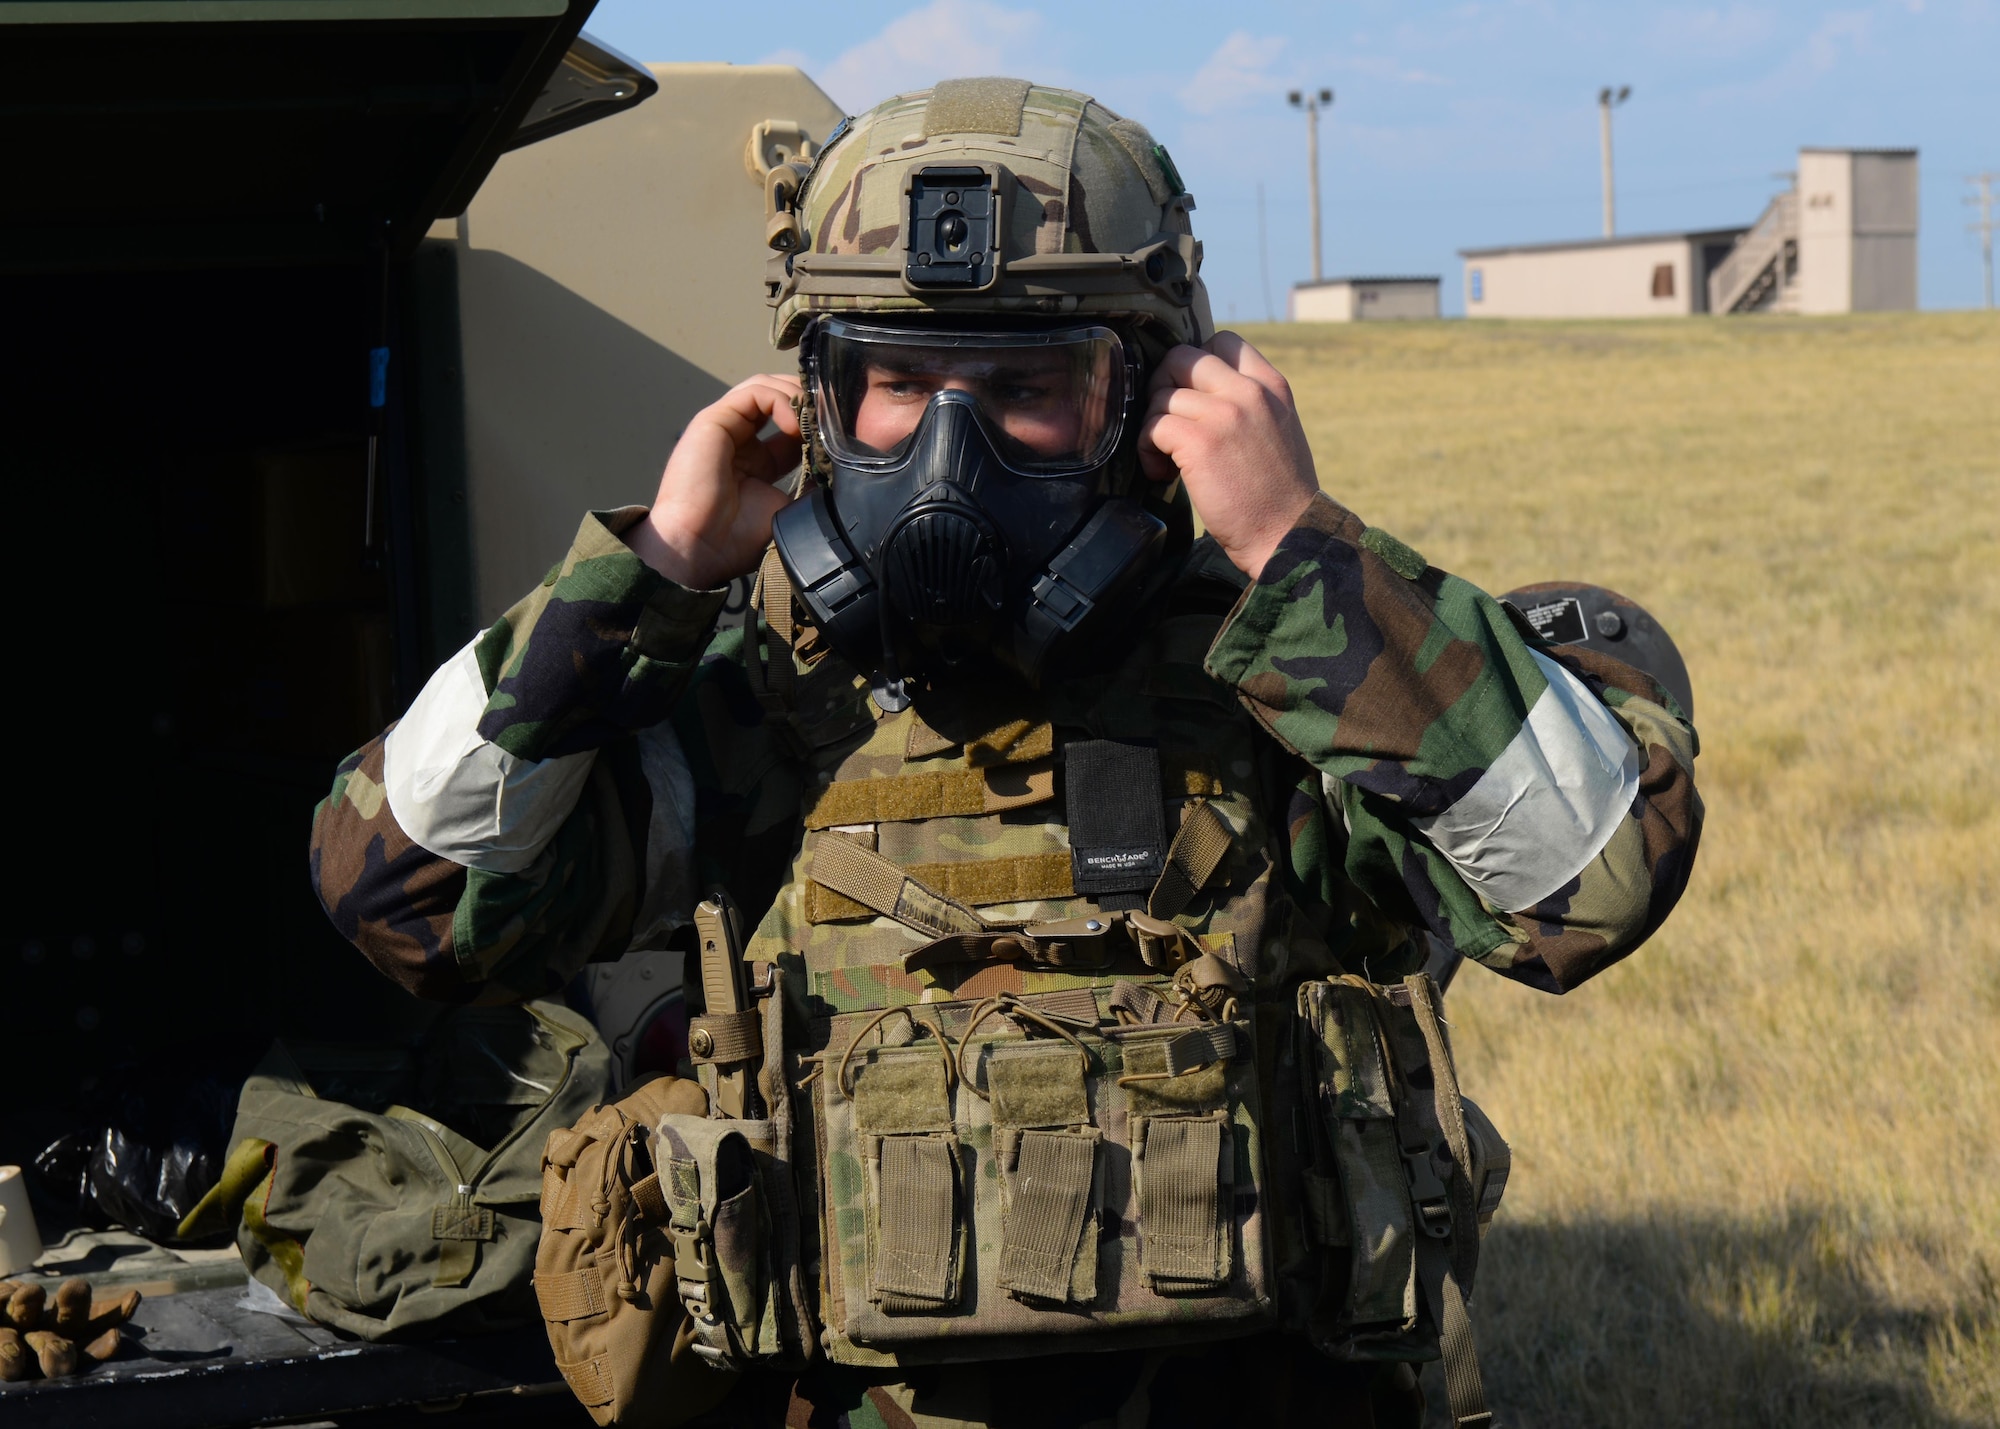 Senior Airman Parker Davis, an explosive ordnance disposal technician assigned to the 28th Civil Engineer Squadron, dons his protective gear during an EOD Team of the Year competition at Ellsworth Air Force Base, S.D., Sept. 12, 2017. During the competition, technicians were subjected to eight different scenarios that they needed to work through as part of a team of three. (U.S. Air Force photo by Airman Nicolas Z. Erwin)